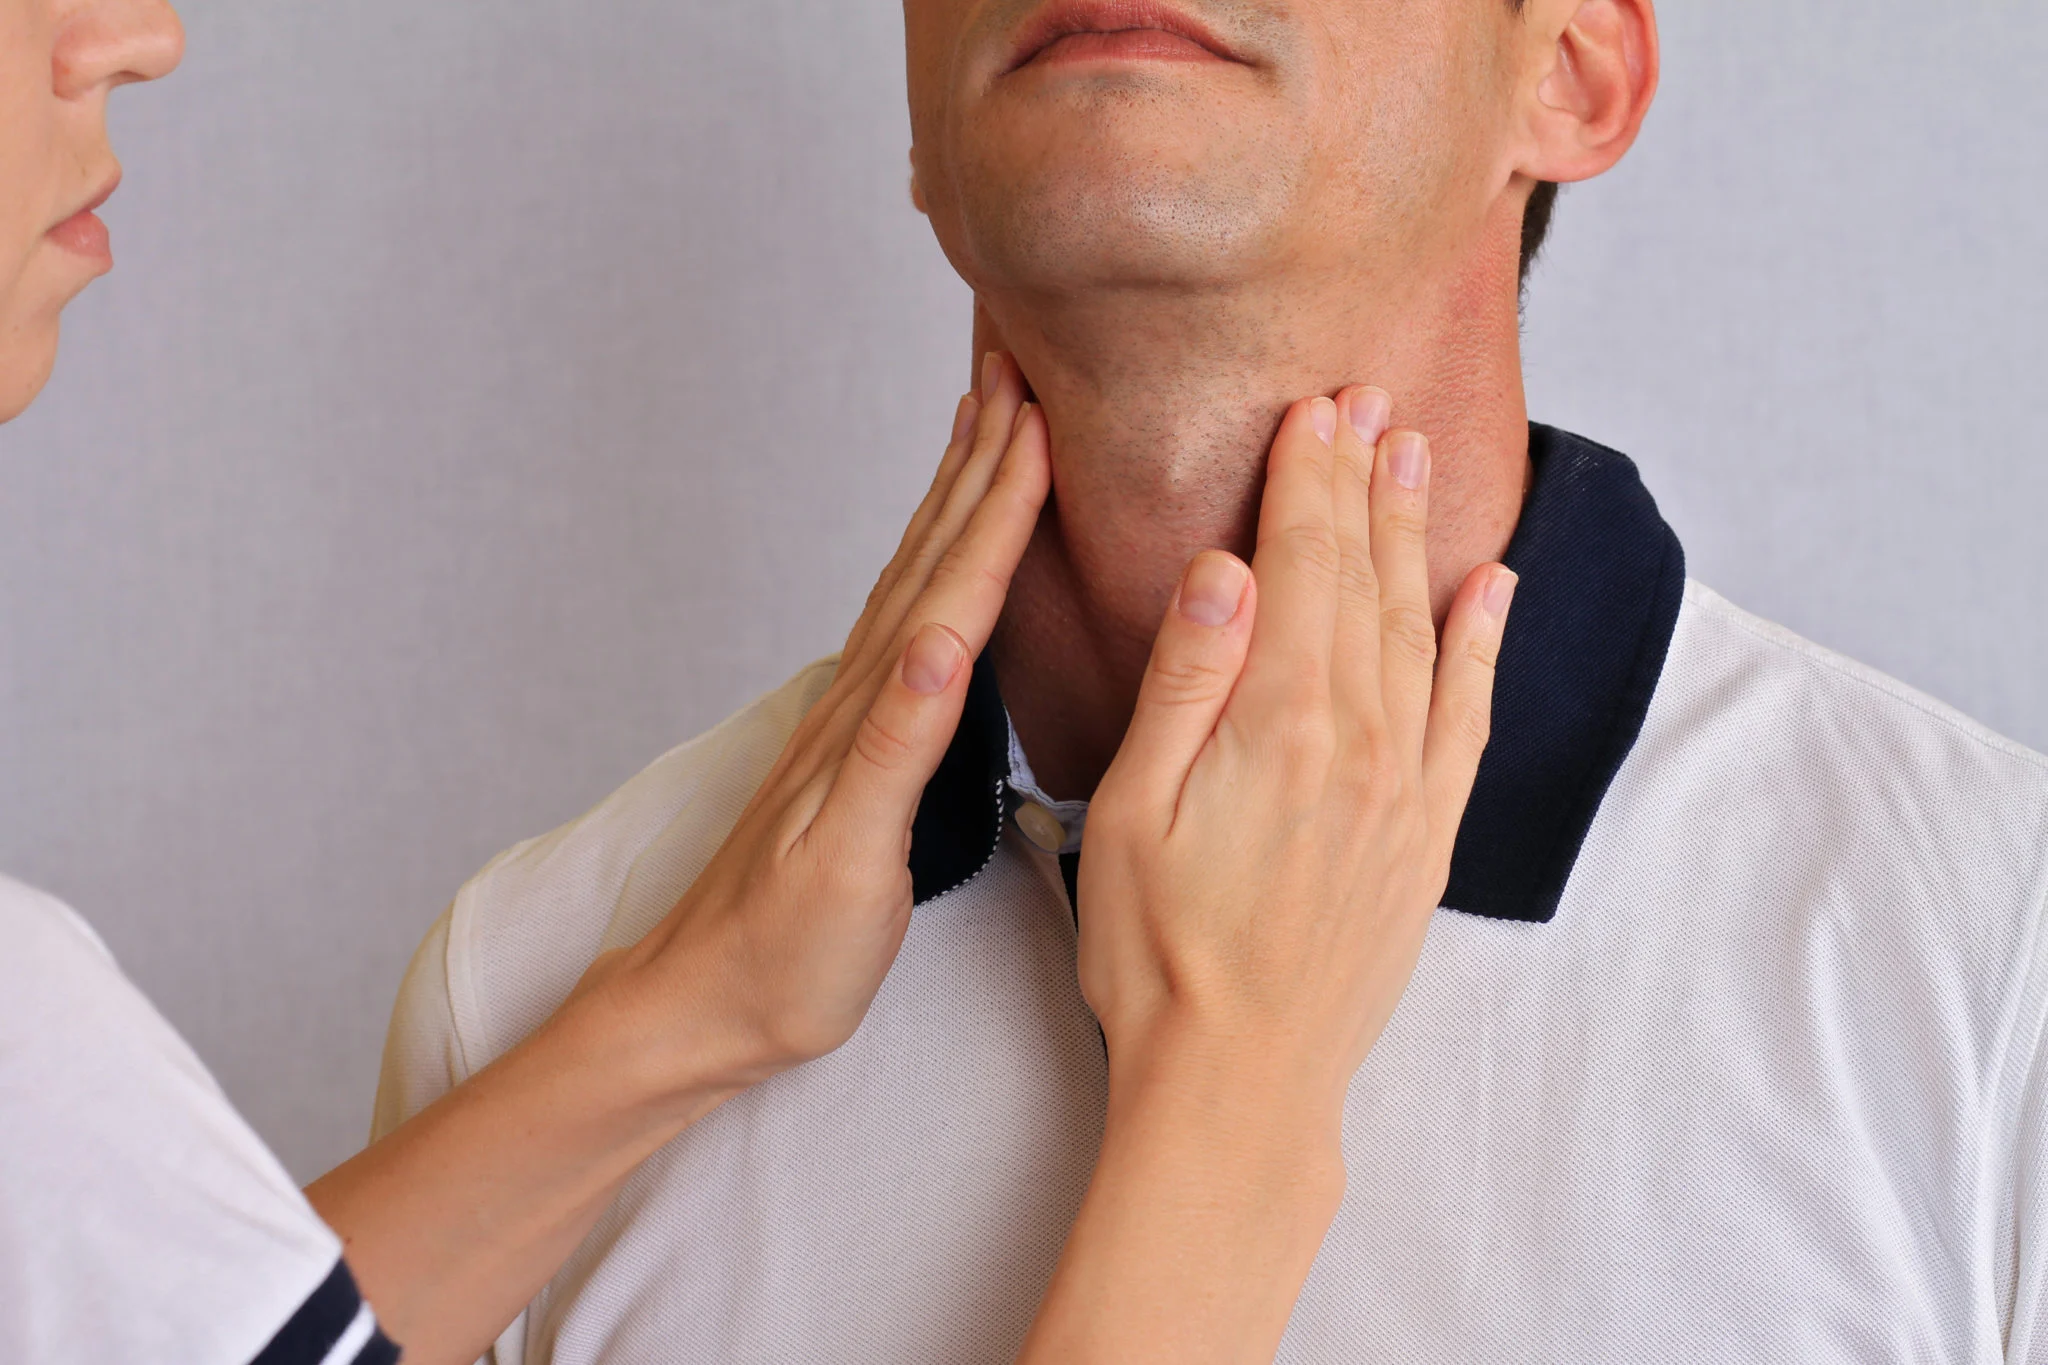 What are the Symptoms of Underactive Thyroid and the Treatment for Underactive Thyroid?